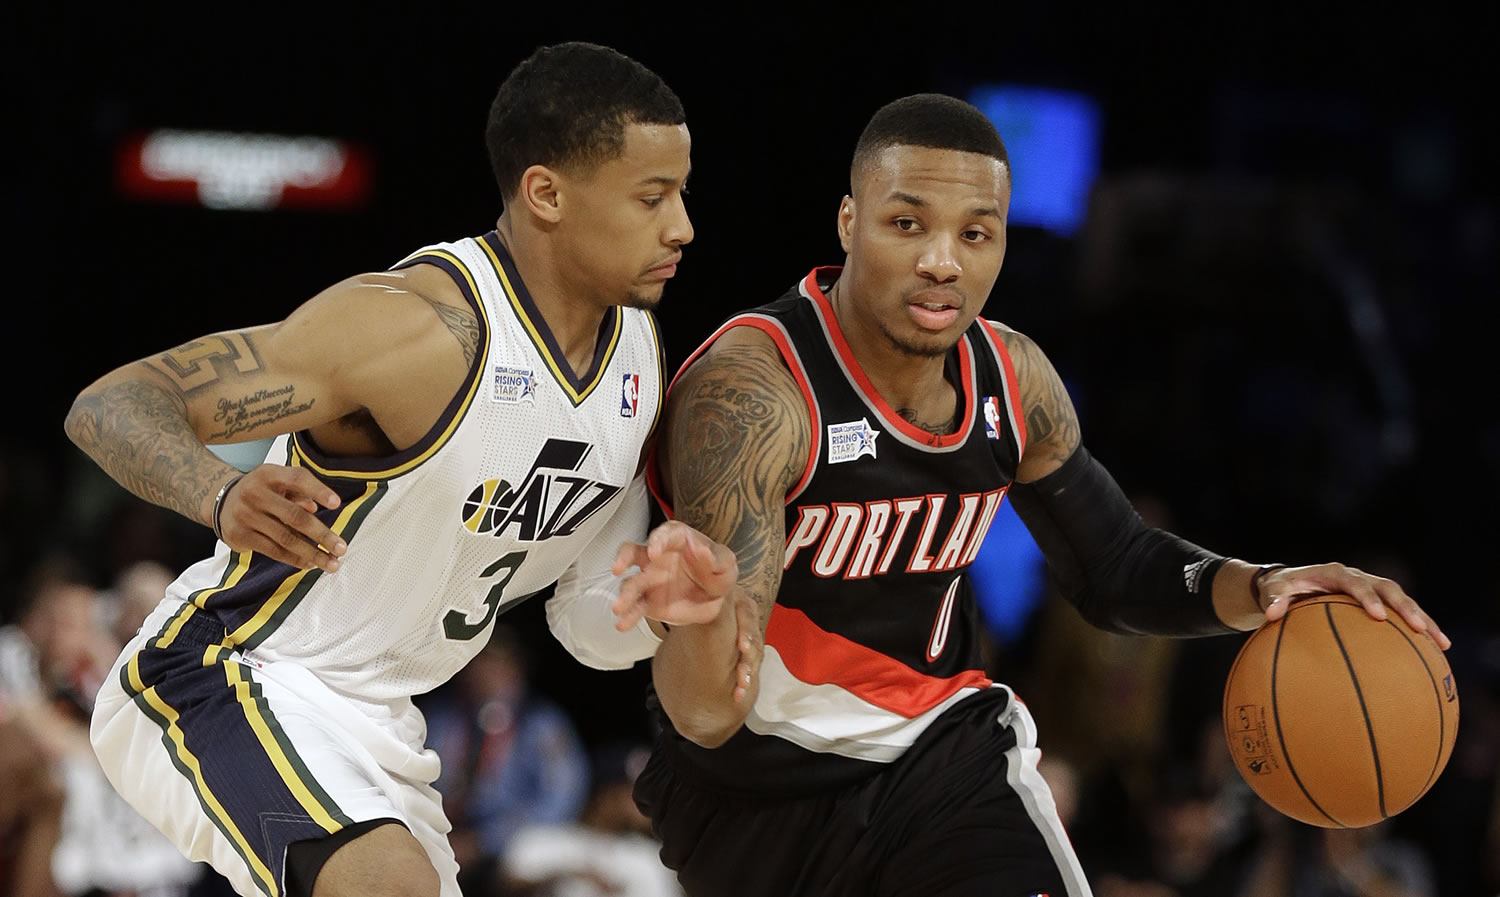 Team Hill's Damian Lillard of the Portland Trail Blazers, right, moves the ball against Team Webber's Trey Burke of the Utah Jazz during the Rising Star NBA All Star Challenge Basketball game, Friday, Feb. 14, 2014, in New Orleans.